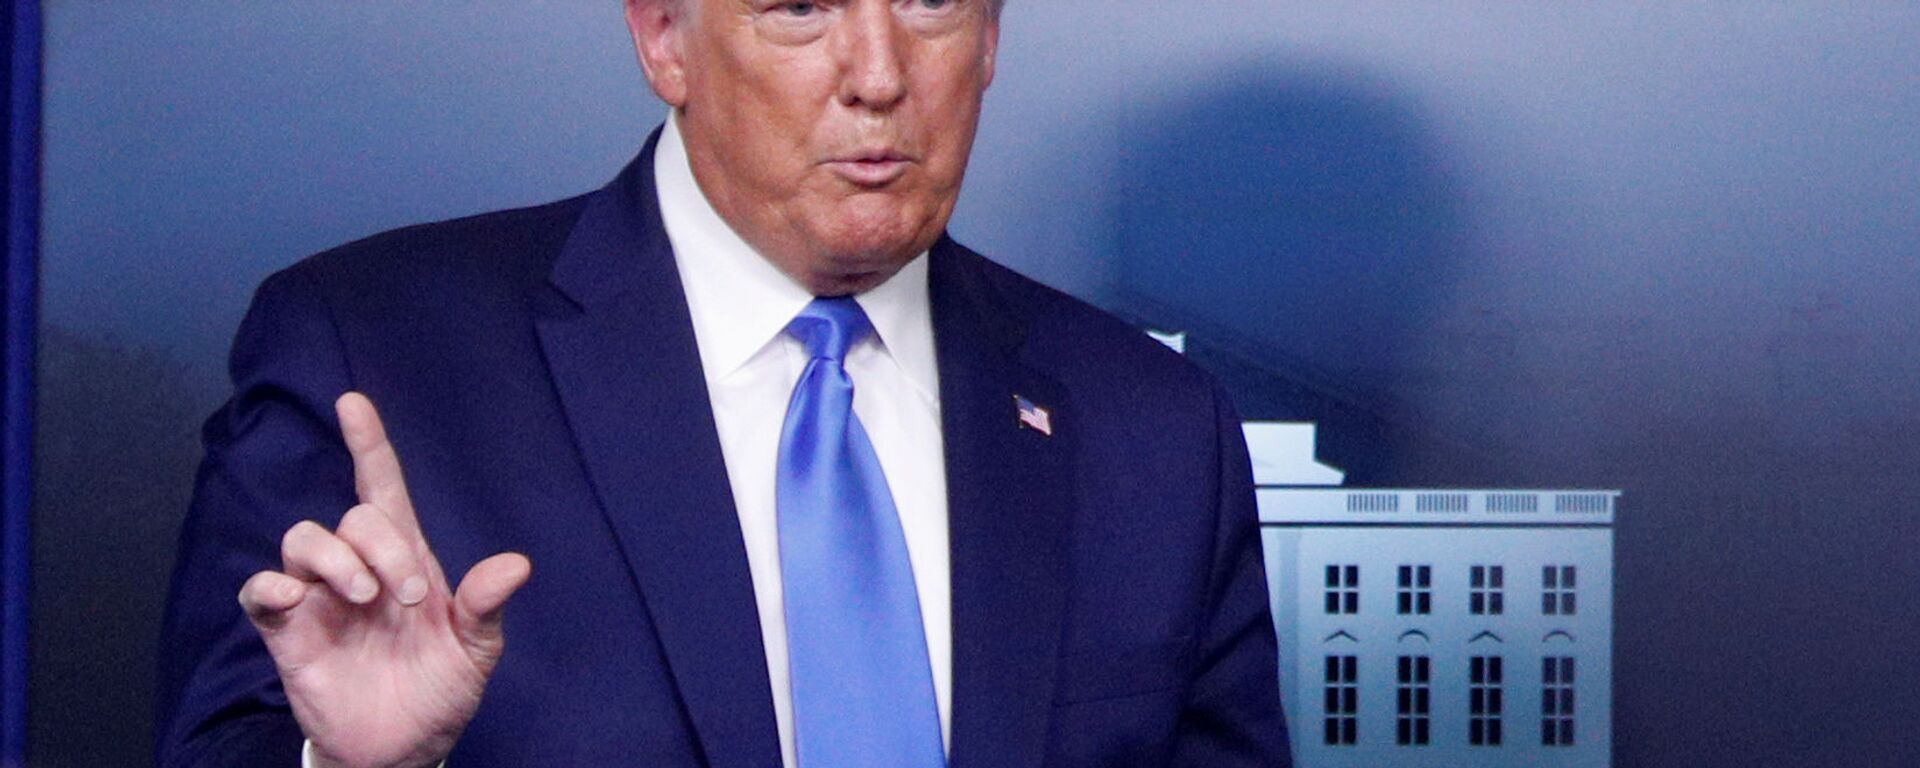 US President Donald Trump speaks to reporters during a news conference in the Brady Press Briefing Room at the White House in Washington, US, 23 September 2020 - Sputnik International, 1920, 24.09.2020